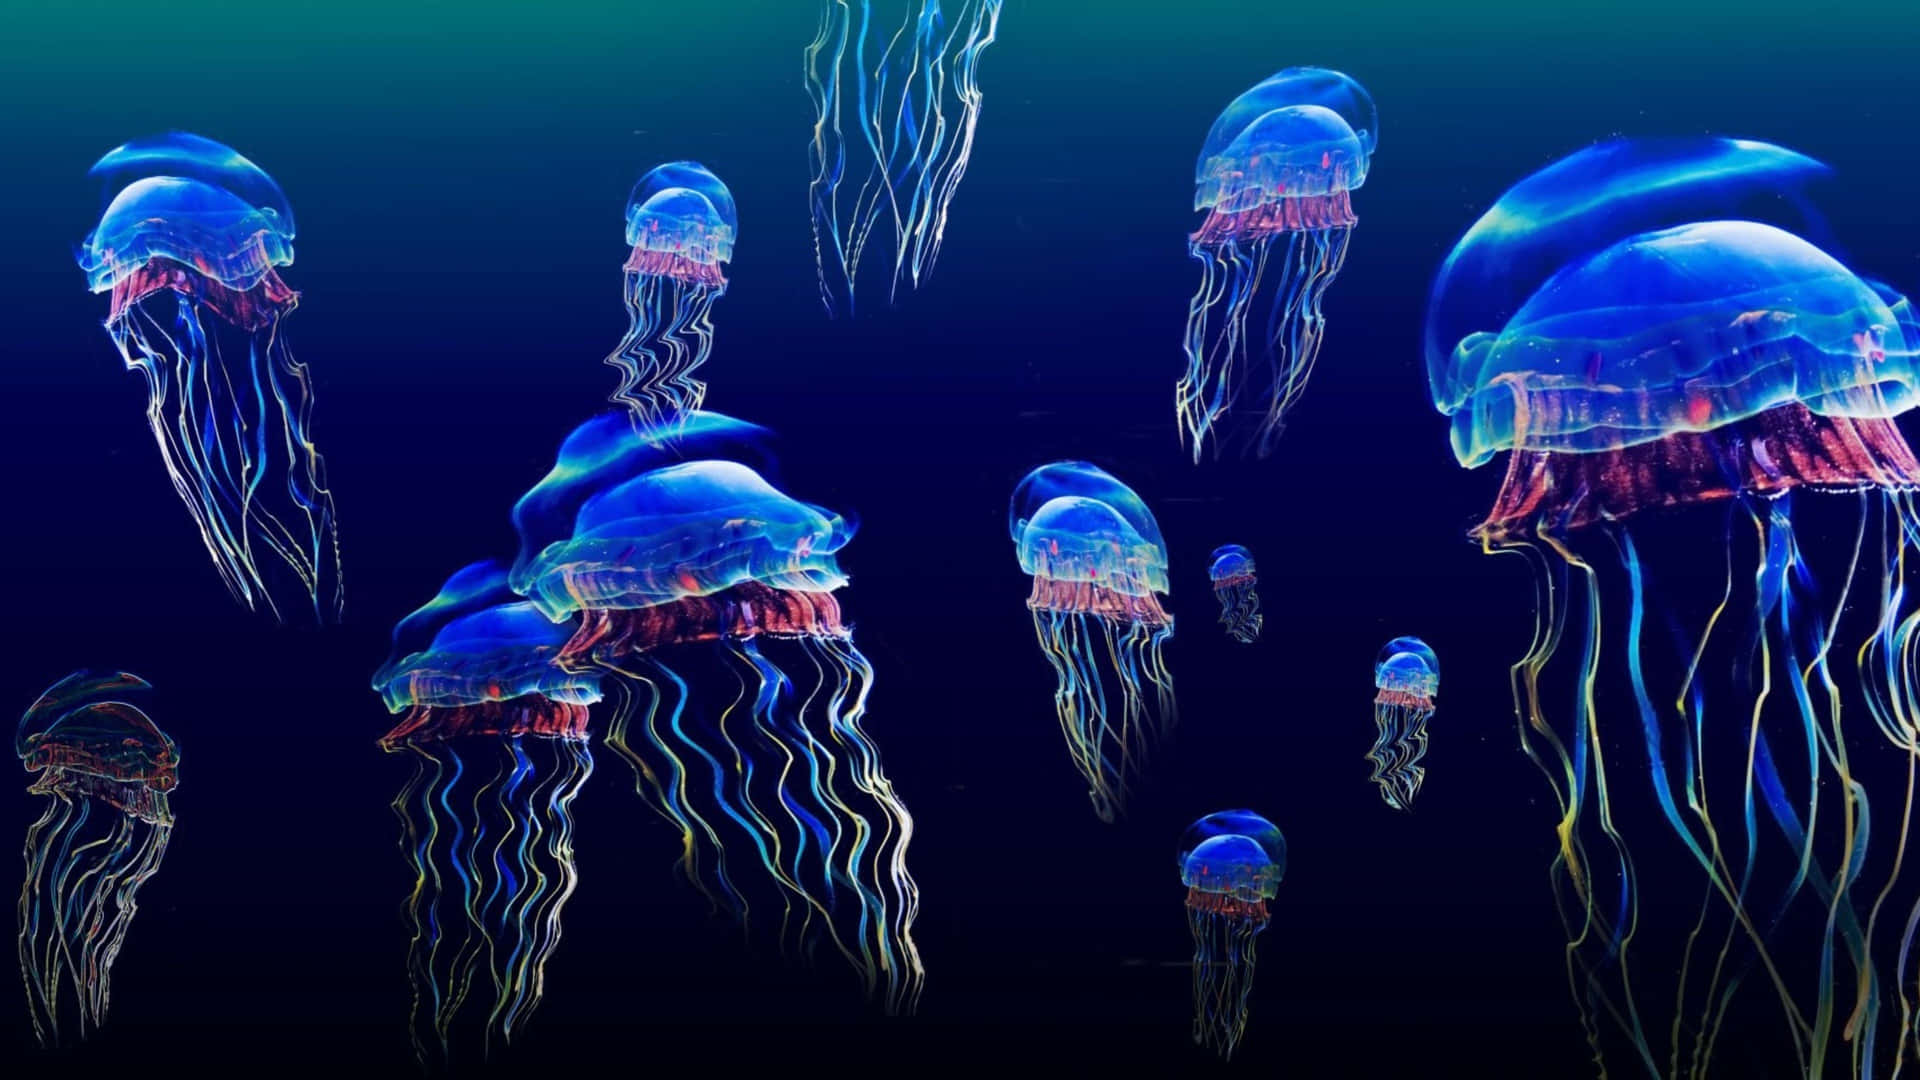 A 4K jellyfish displaying an array of vibrant colors in its sway" Wallpaper